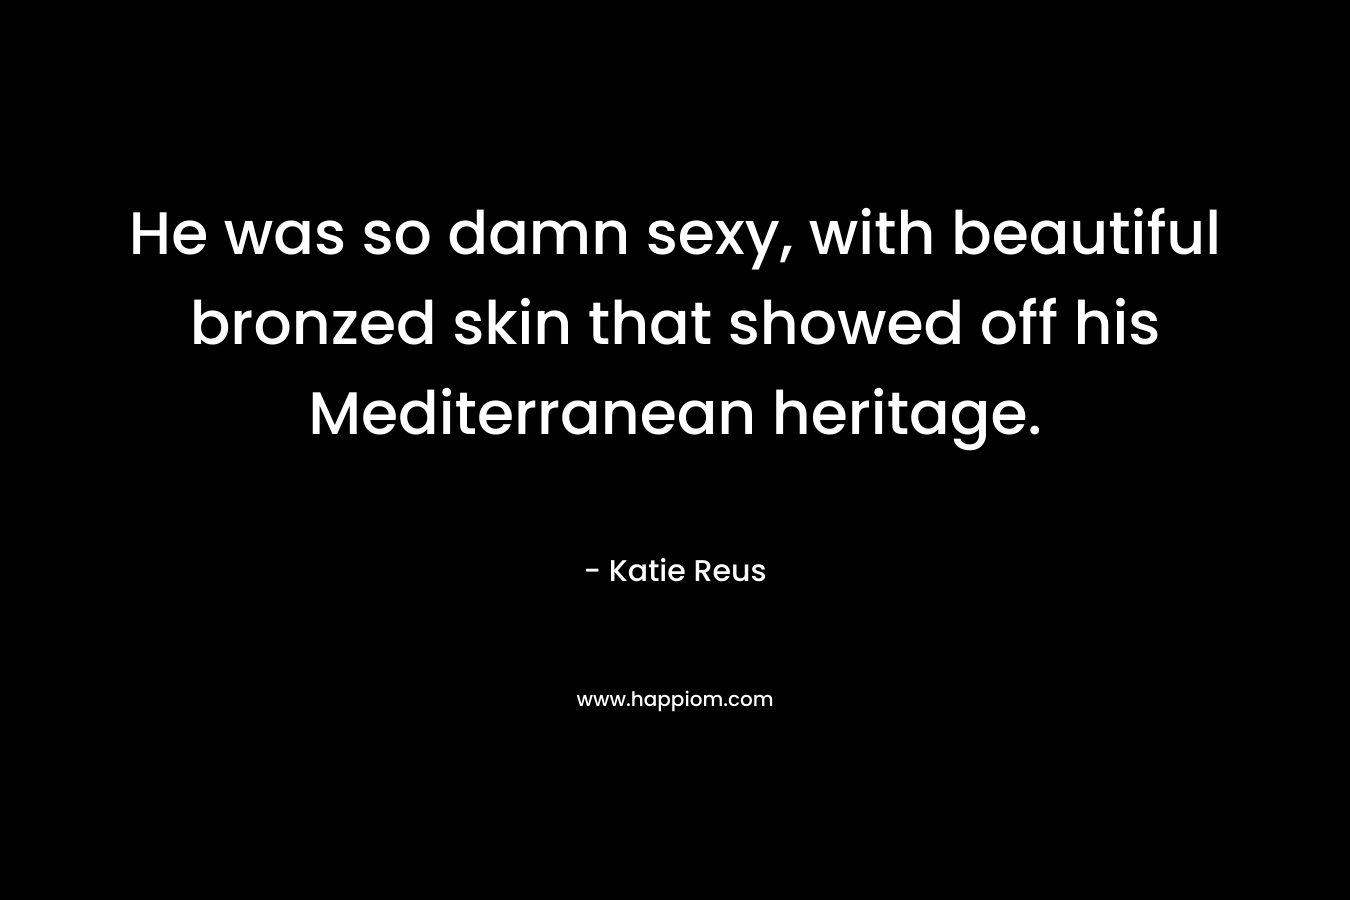 He was so damn sexy, with beautiful bronzed skin that showed off his Mediterranean heritage. – Katie Reus